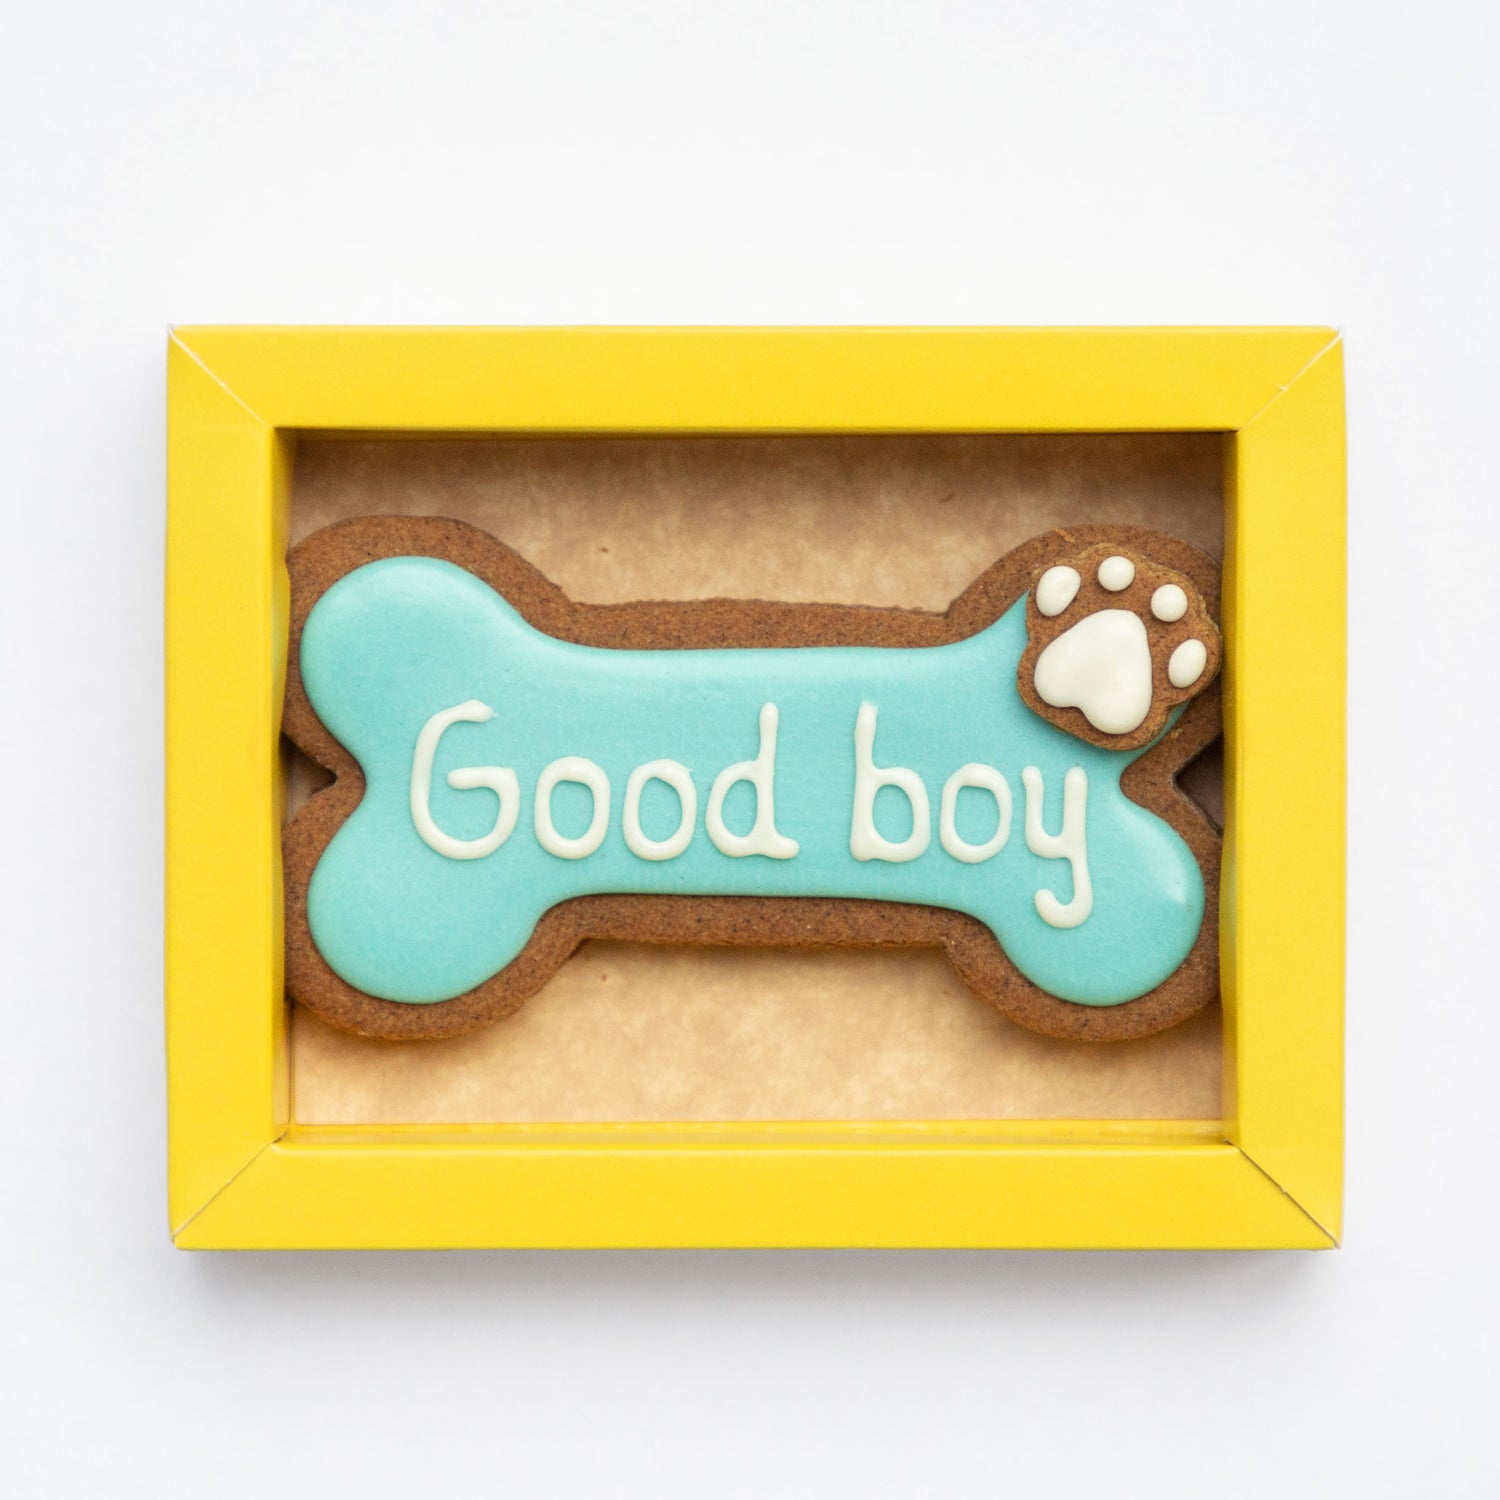 Dog Biscuits Good Boy And Good Girl Boy Blue In Tray 2